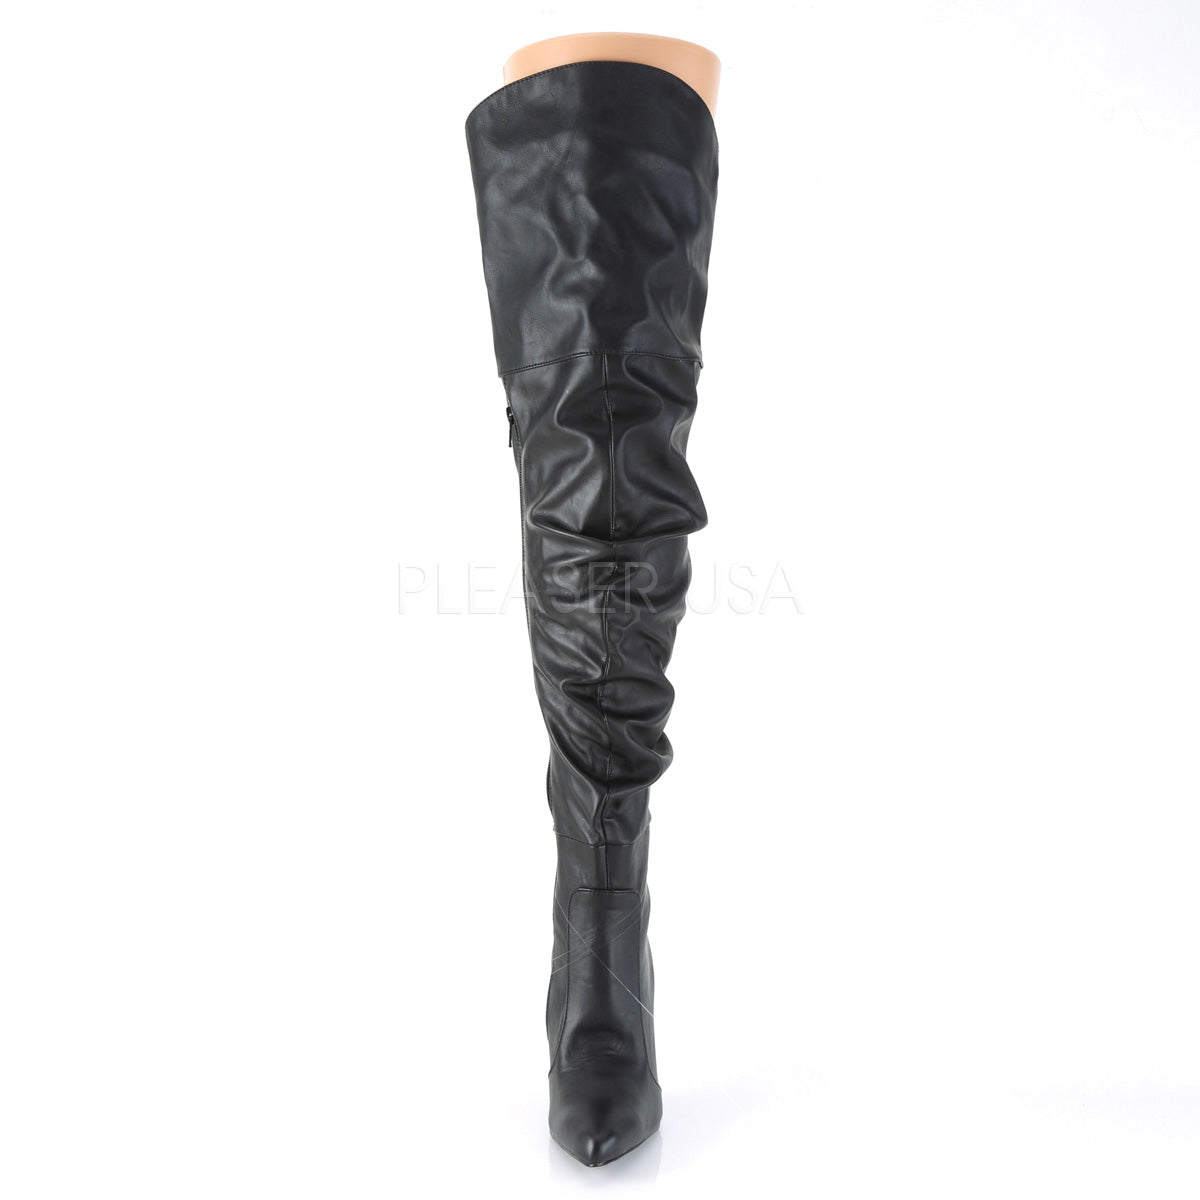 Bad Girls Slouch Thigh High Boots Black